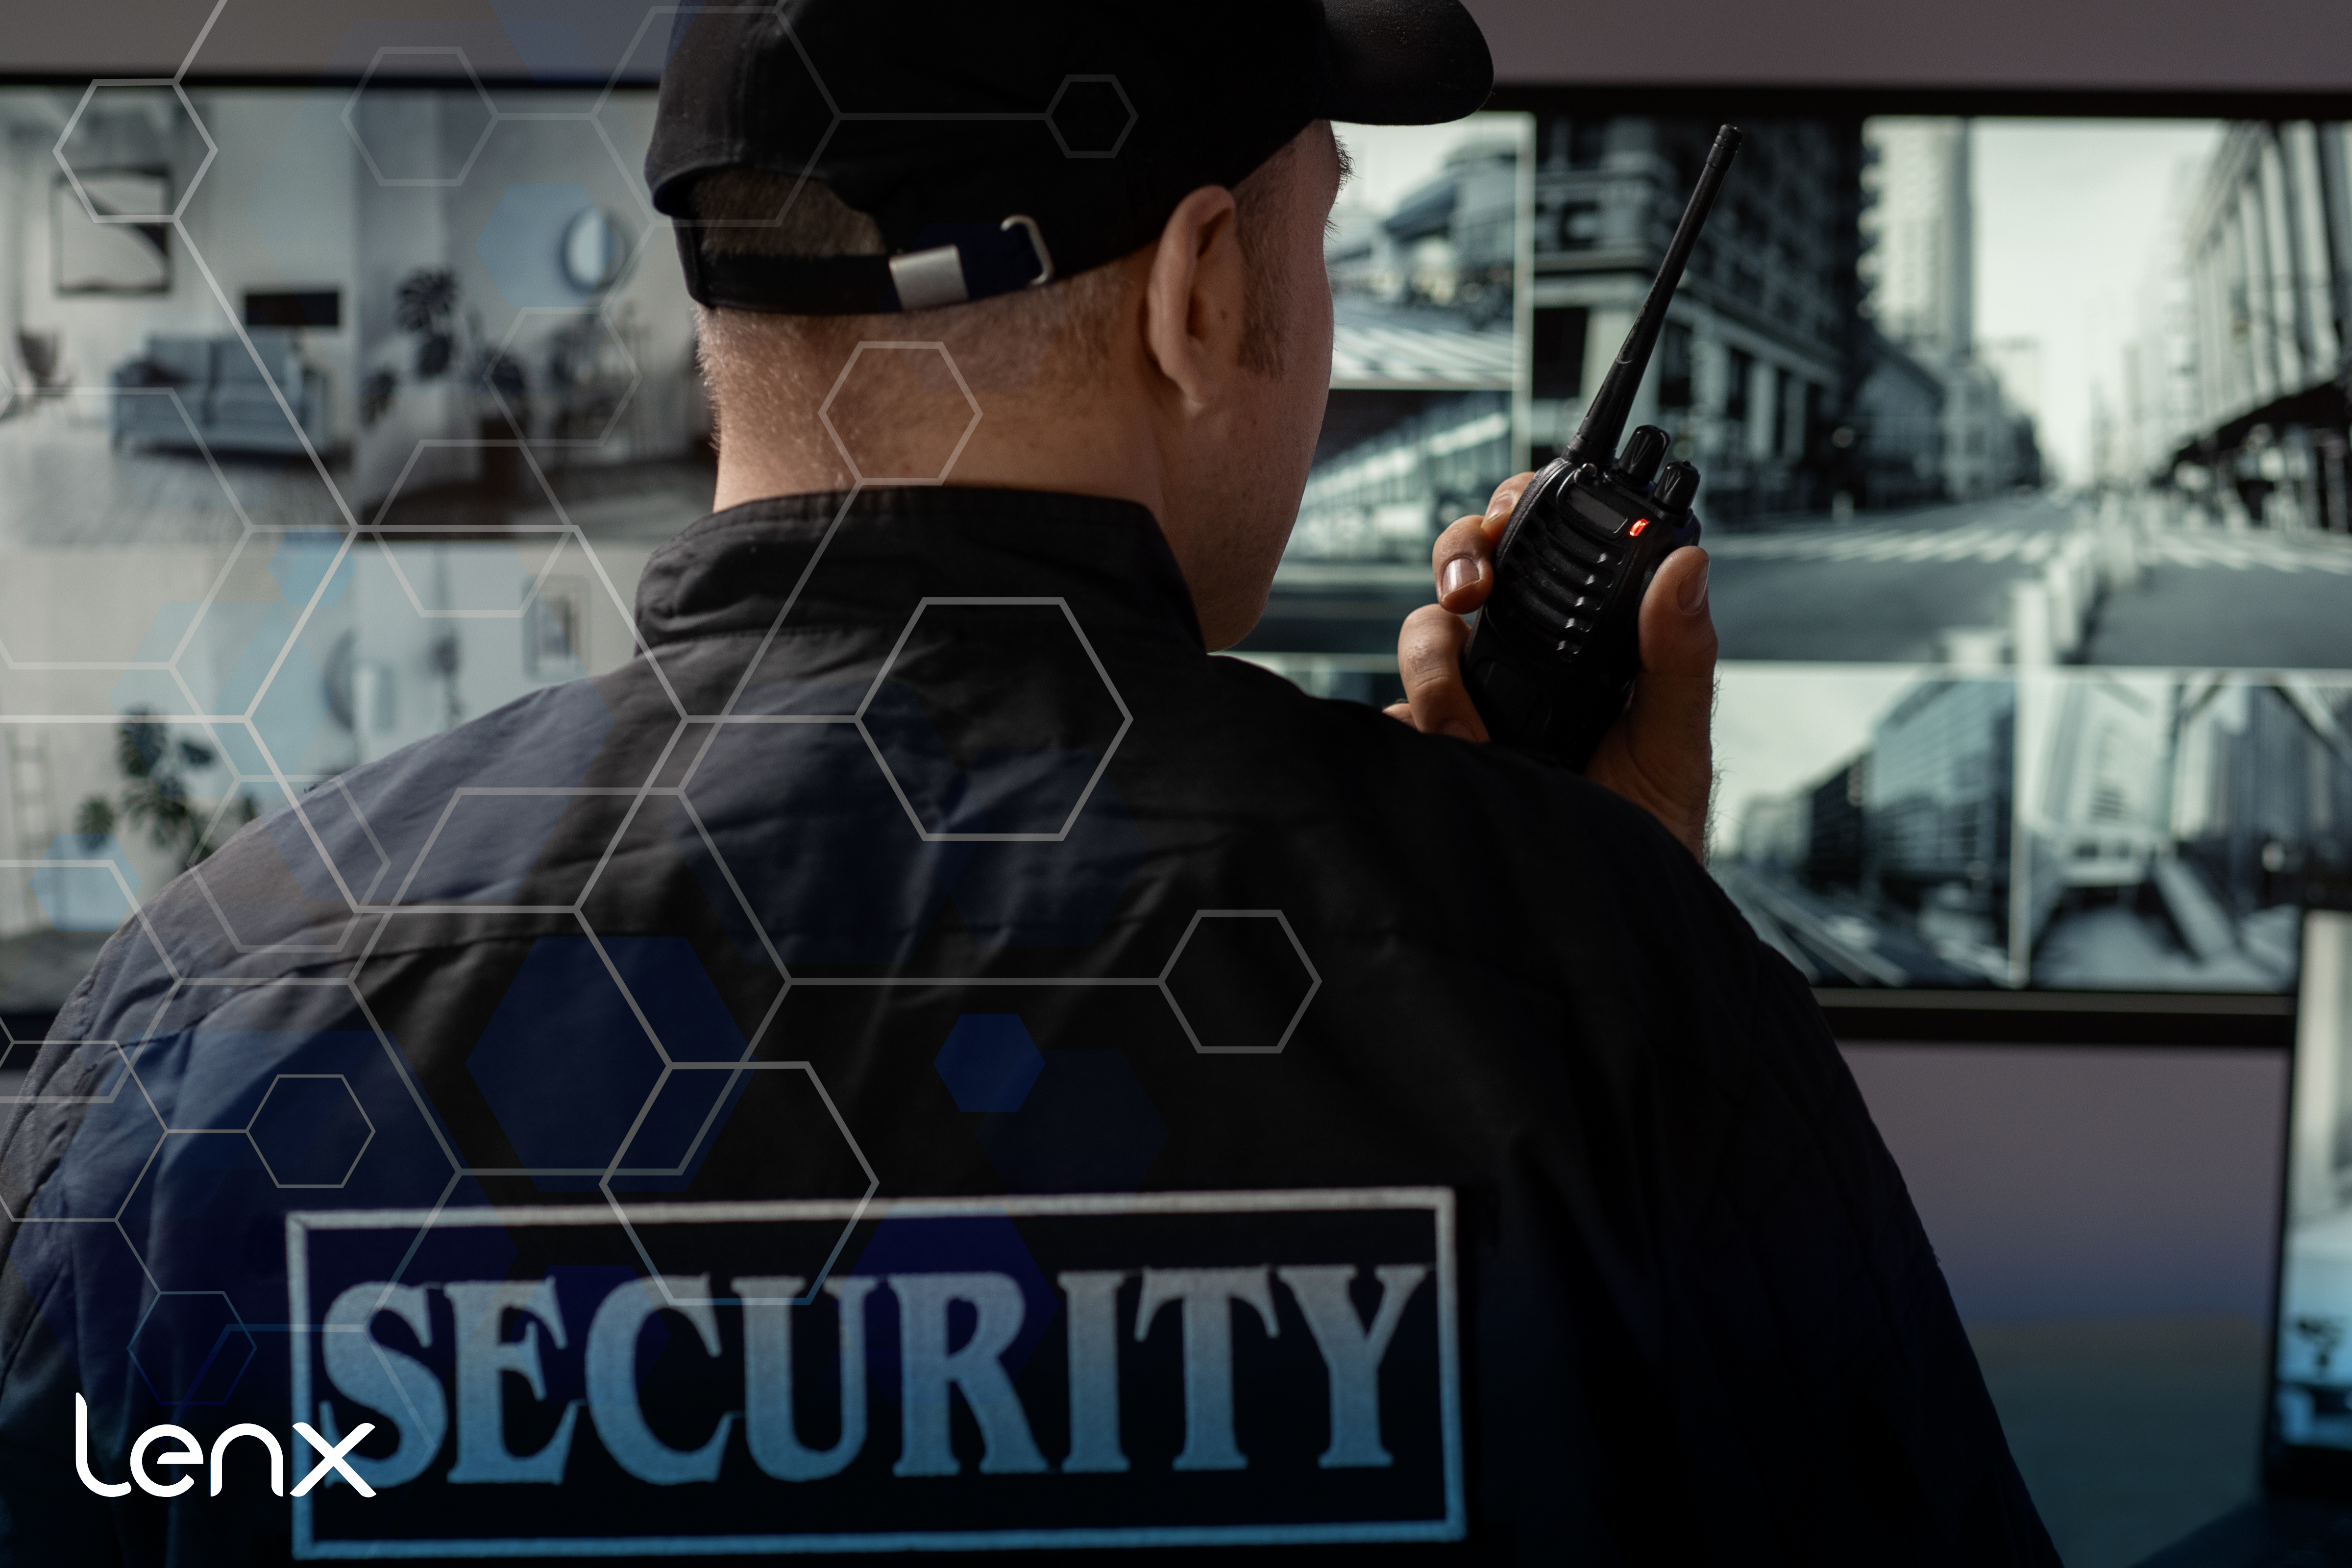 How Dispatchers Are Alerted Earlier With AI Security, Gun Detection Systems